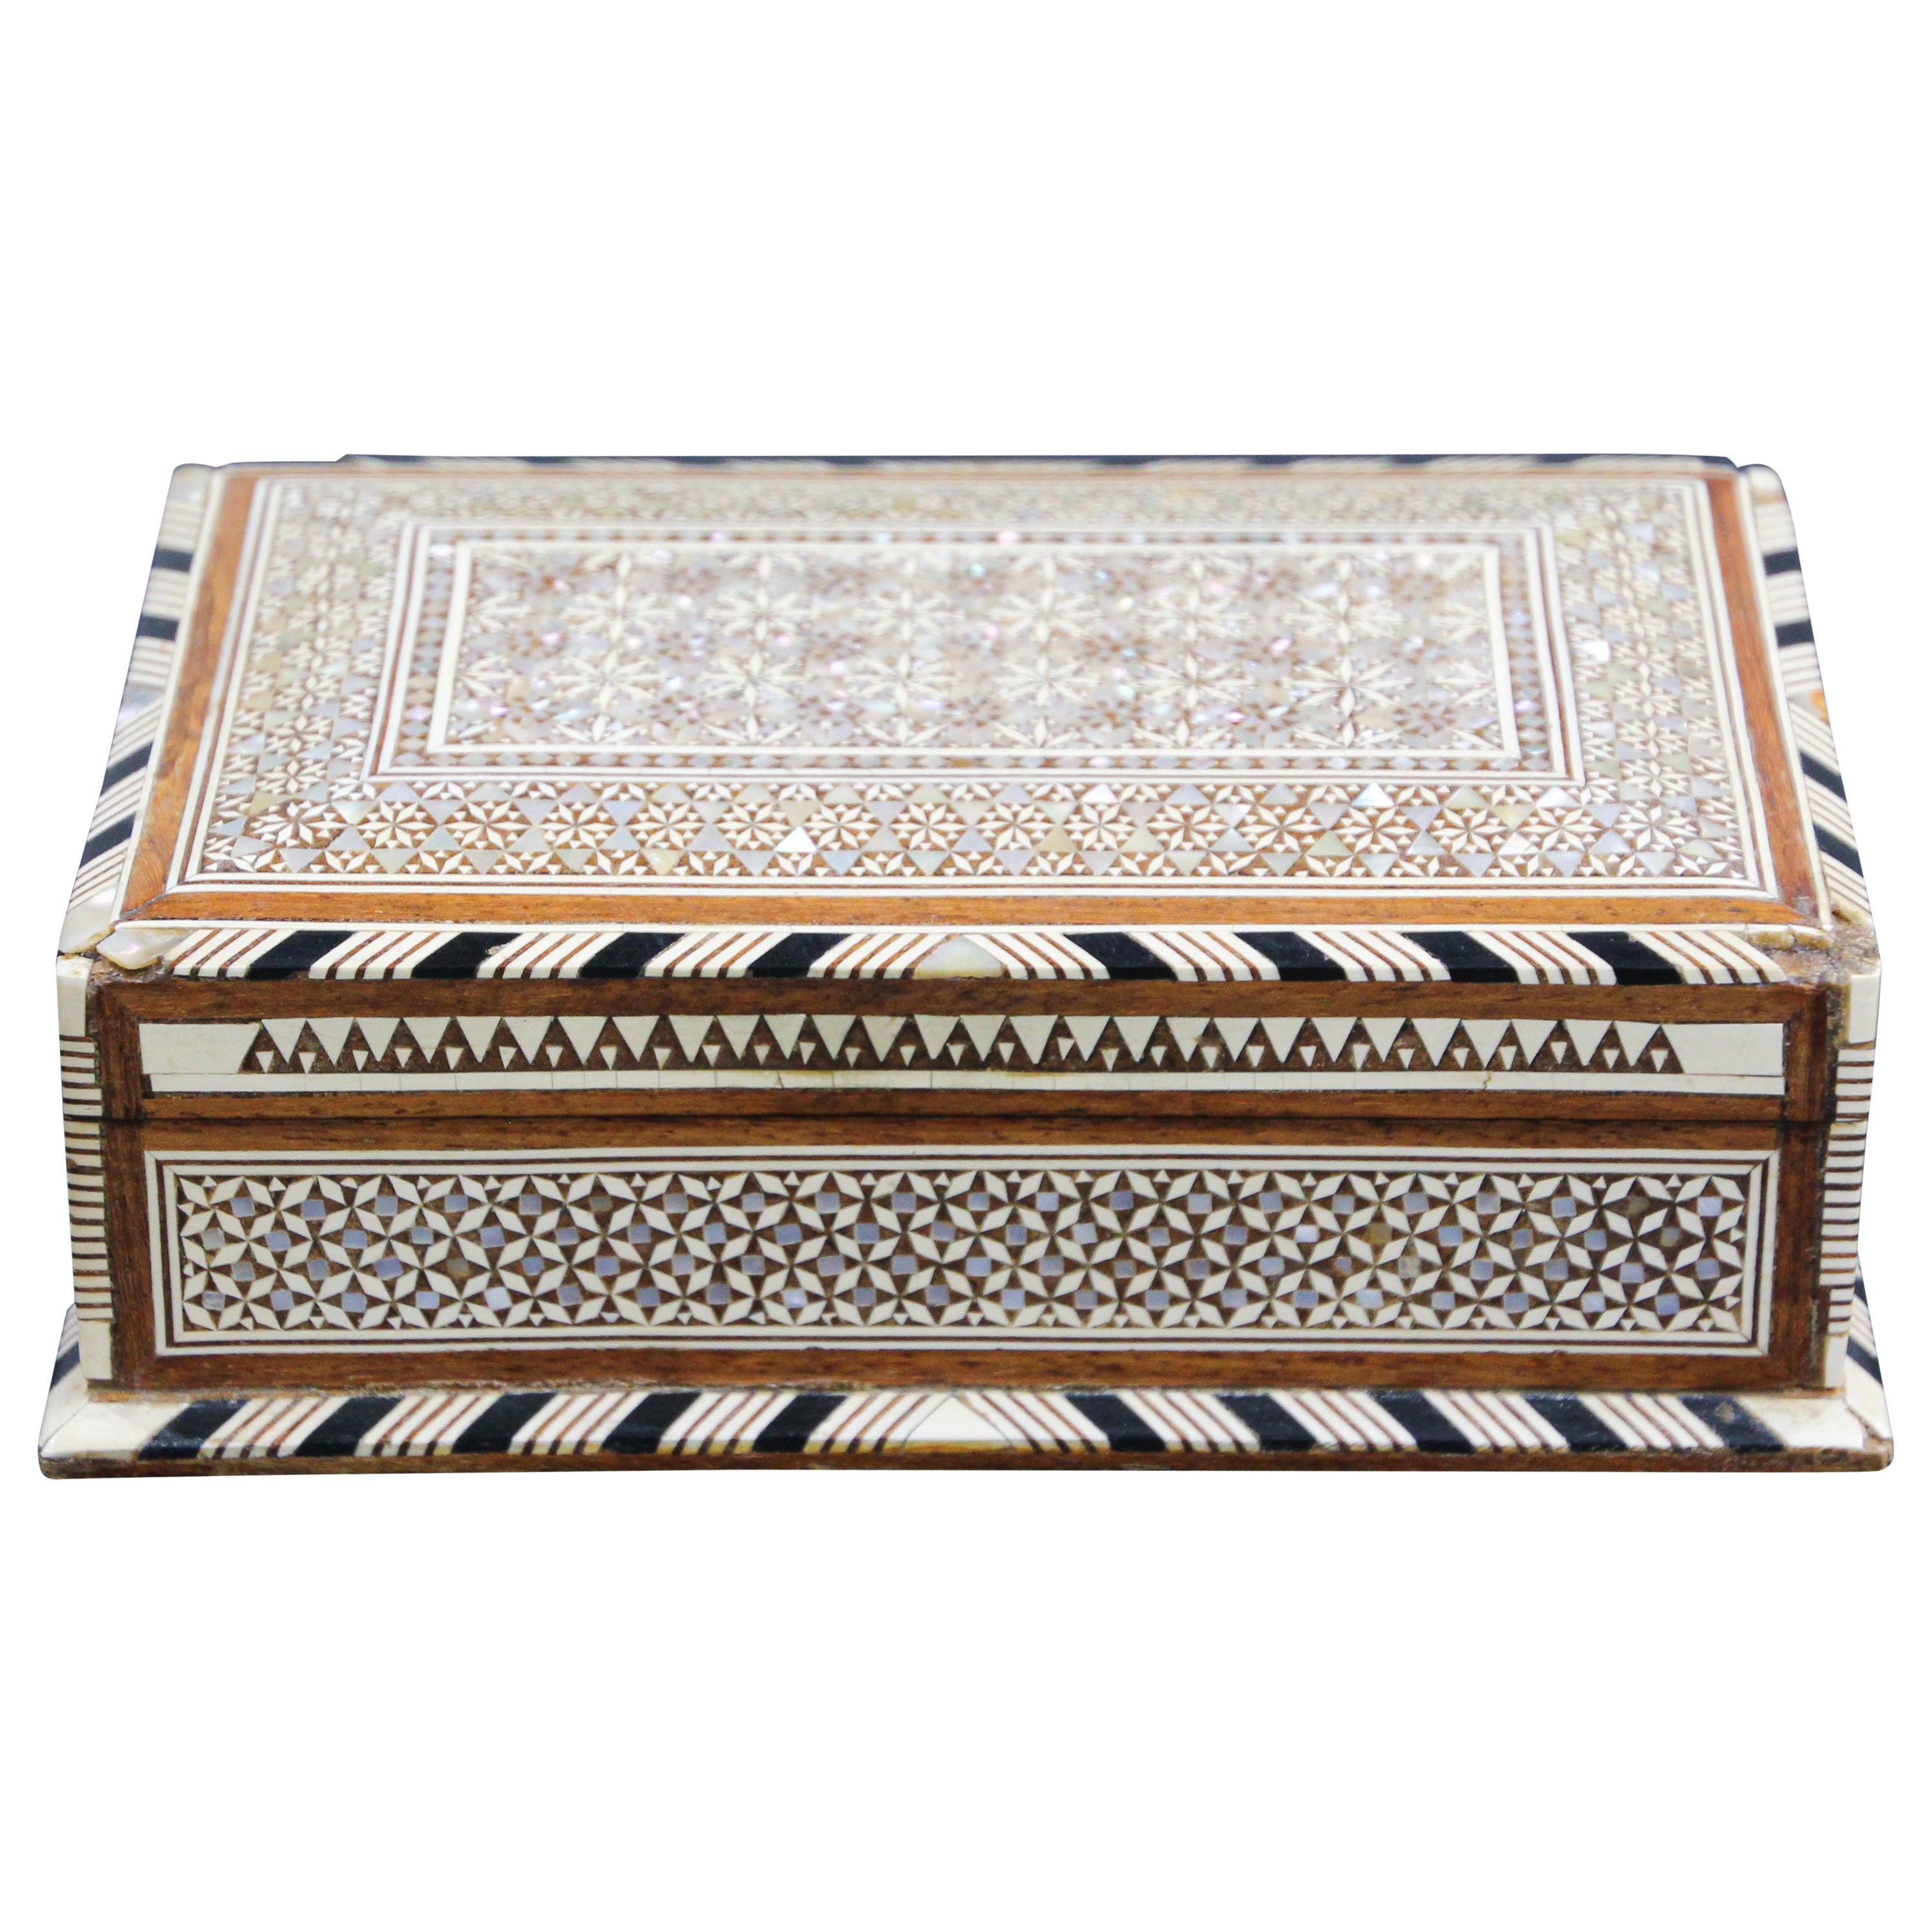 Moorish Handcrafted Middle Eastern Mosaic Inlaid Decorative Box For Sale